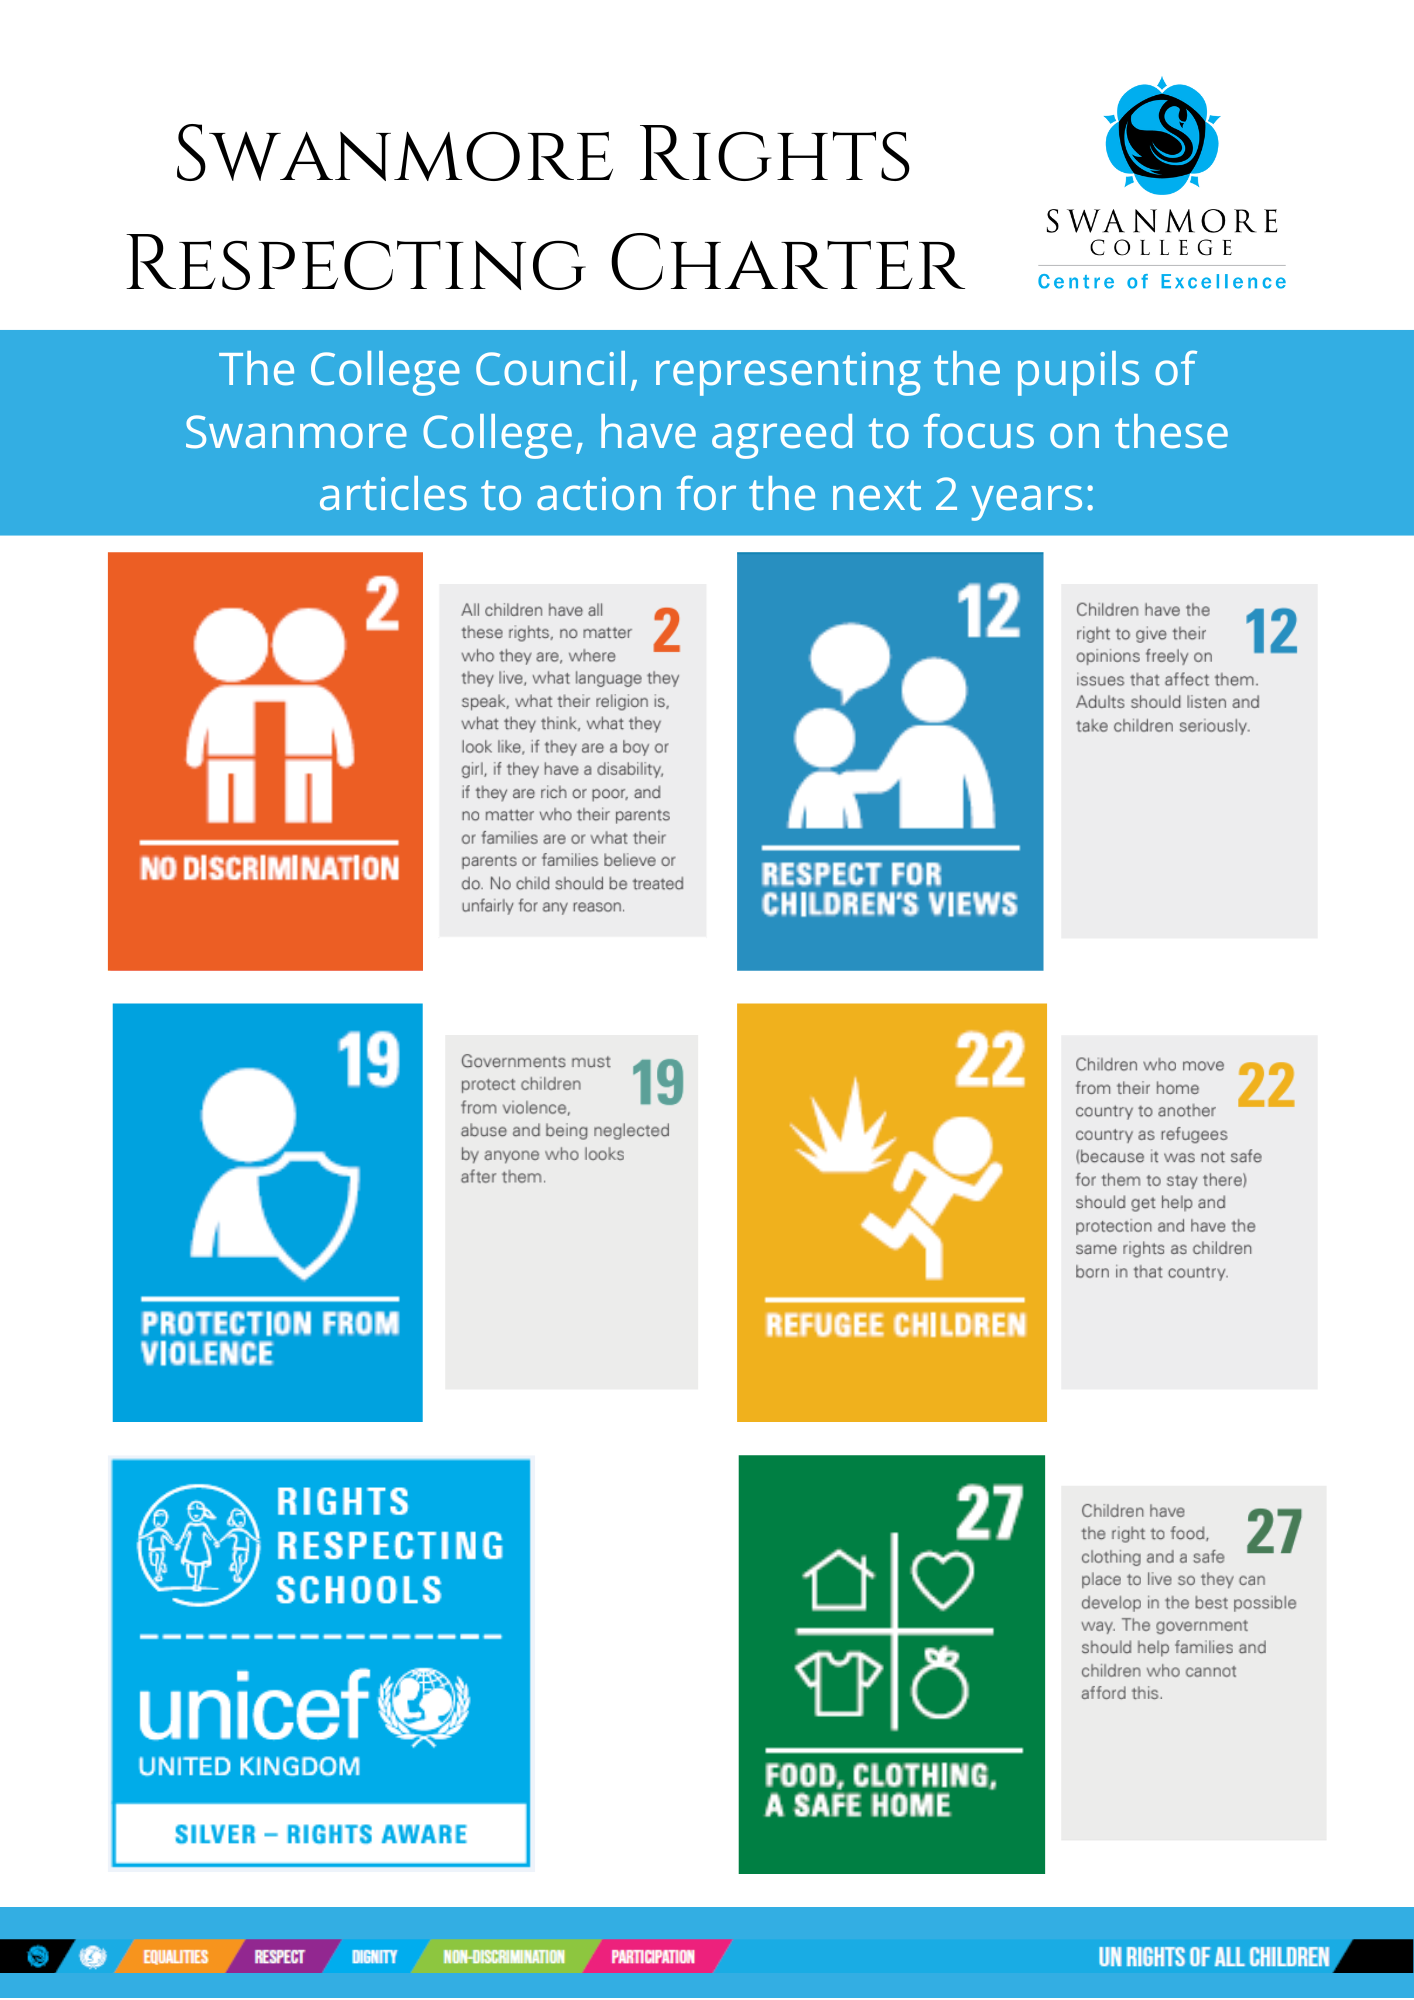 Image showing the College's Rights Respecting Charter